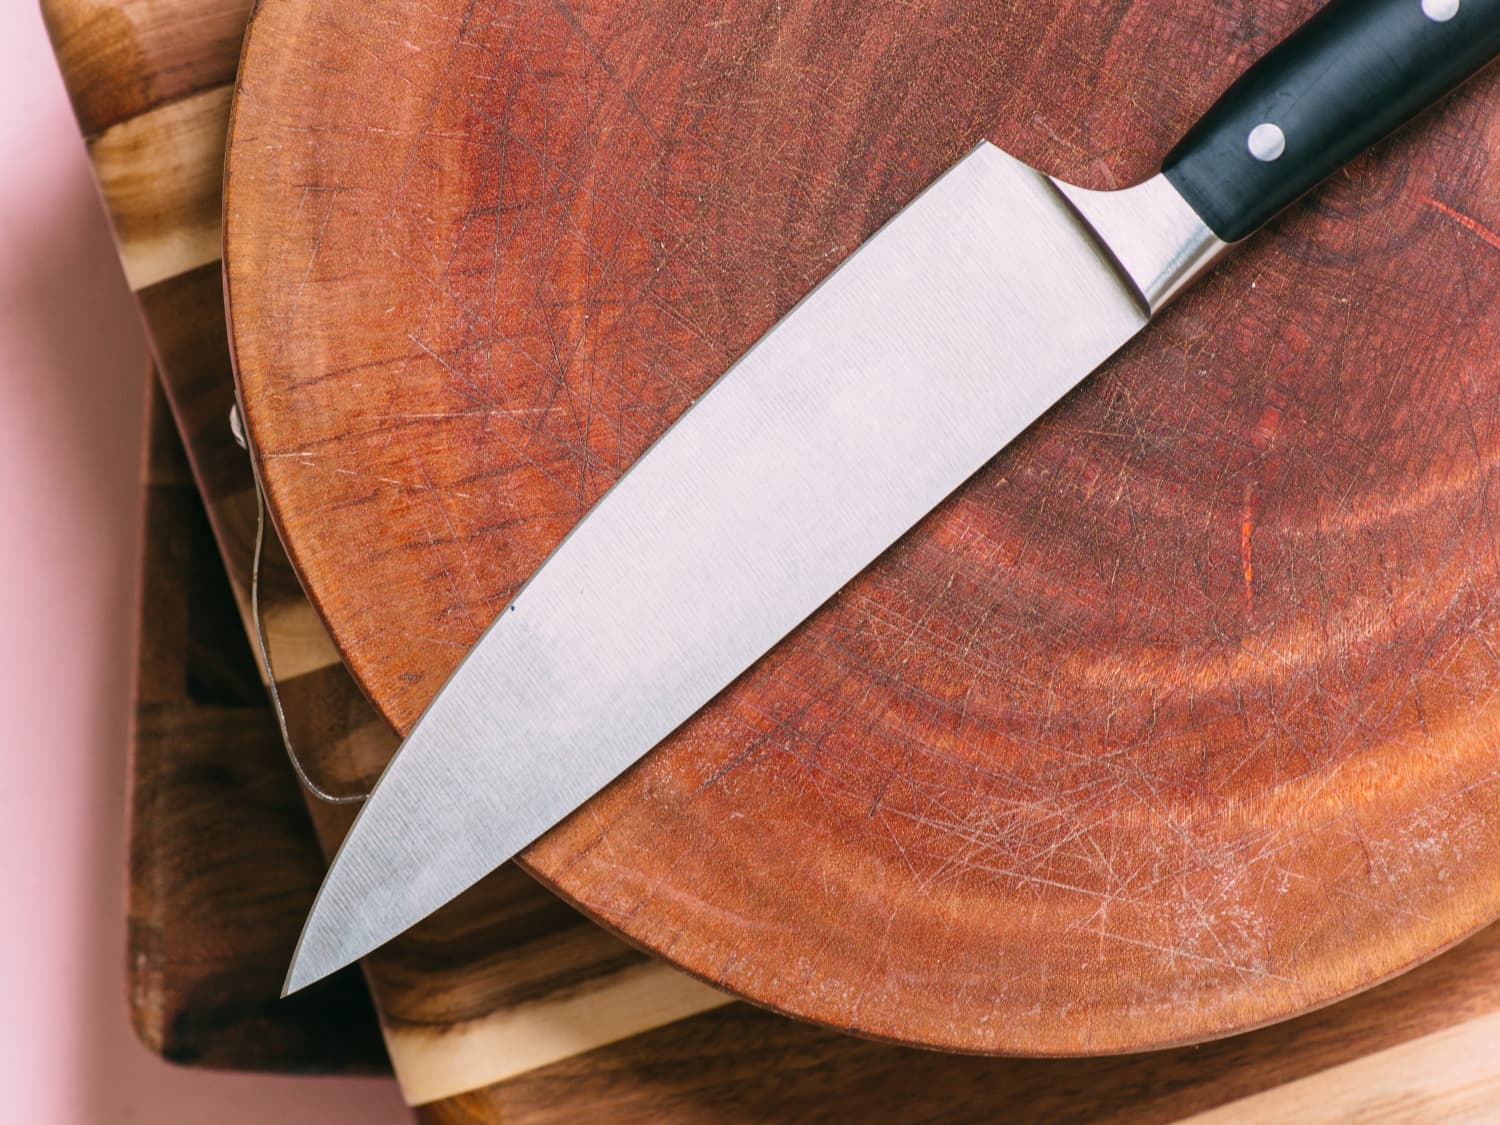 Analyze This: Hardened wood can make sharp steak knives